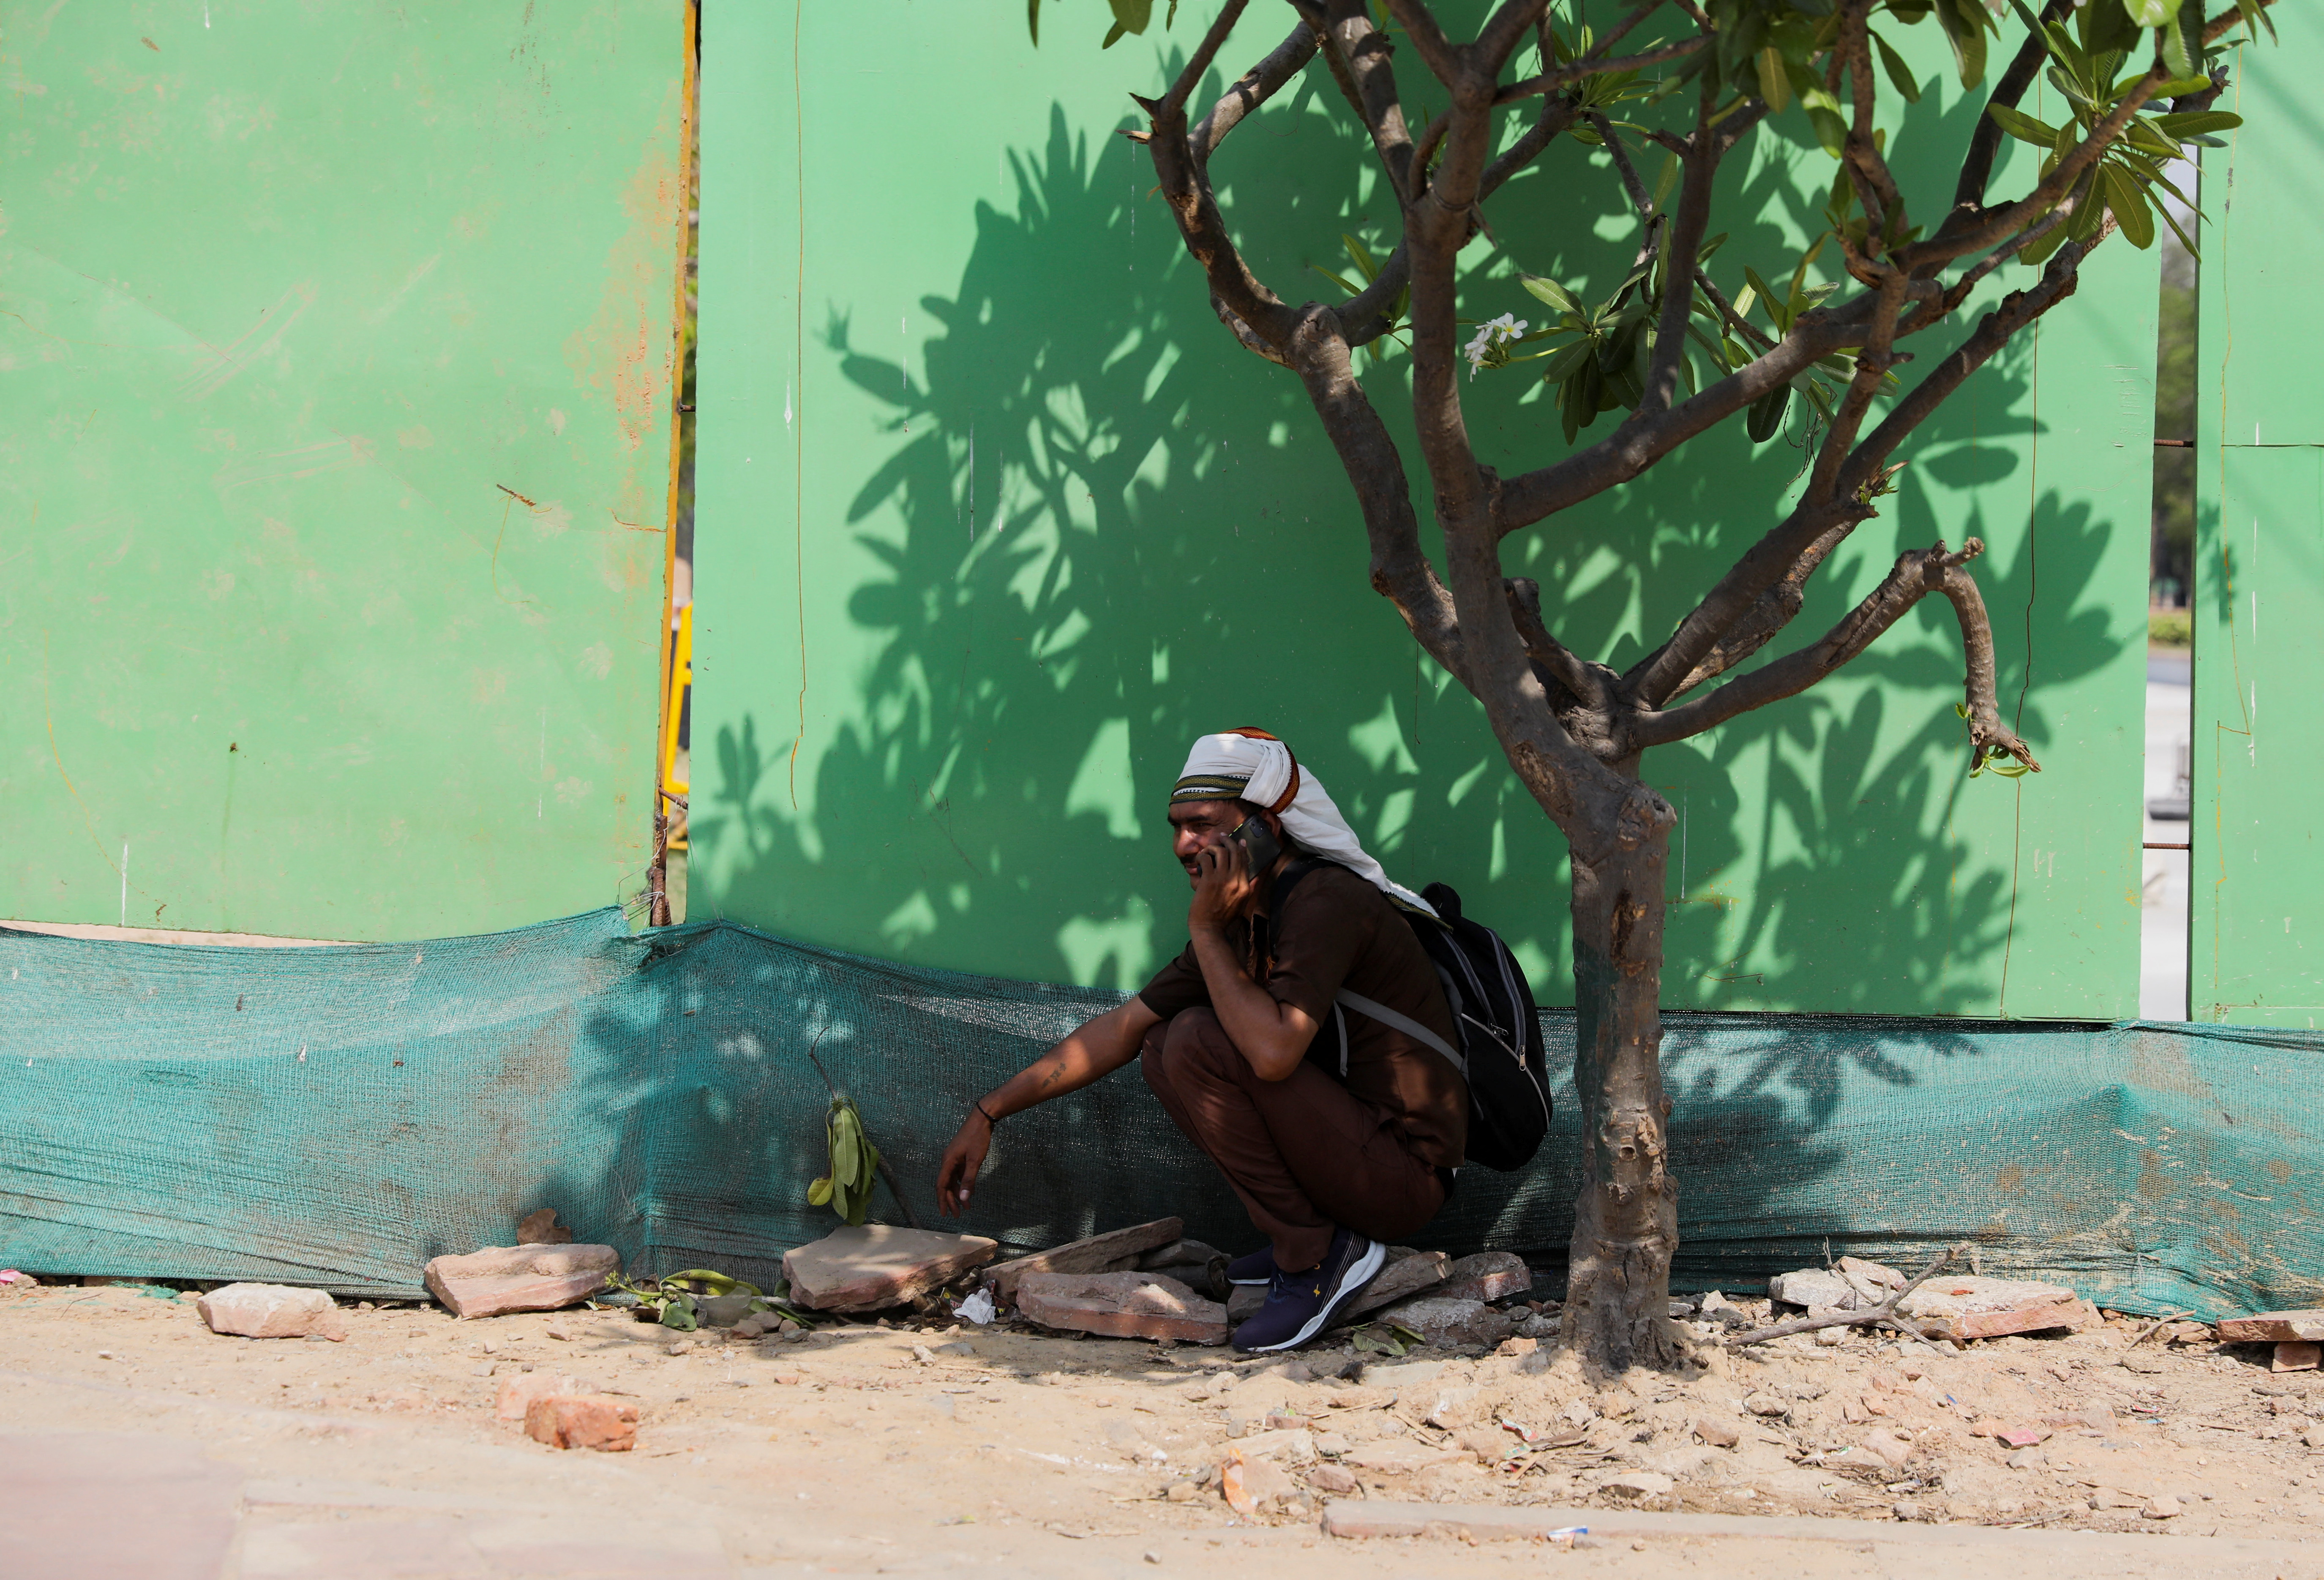 A man takes shelter under a tree on a hot summer day, in New Delhi